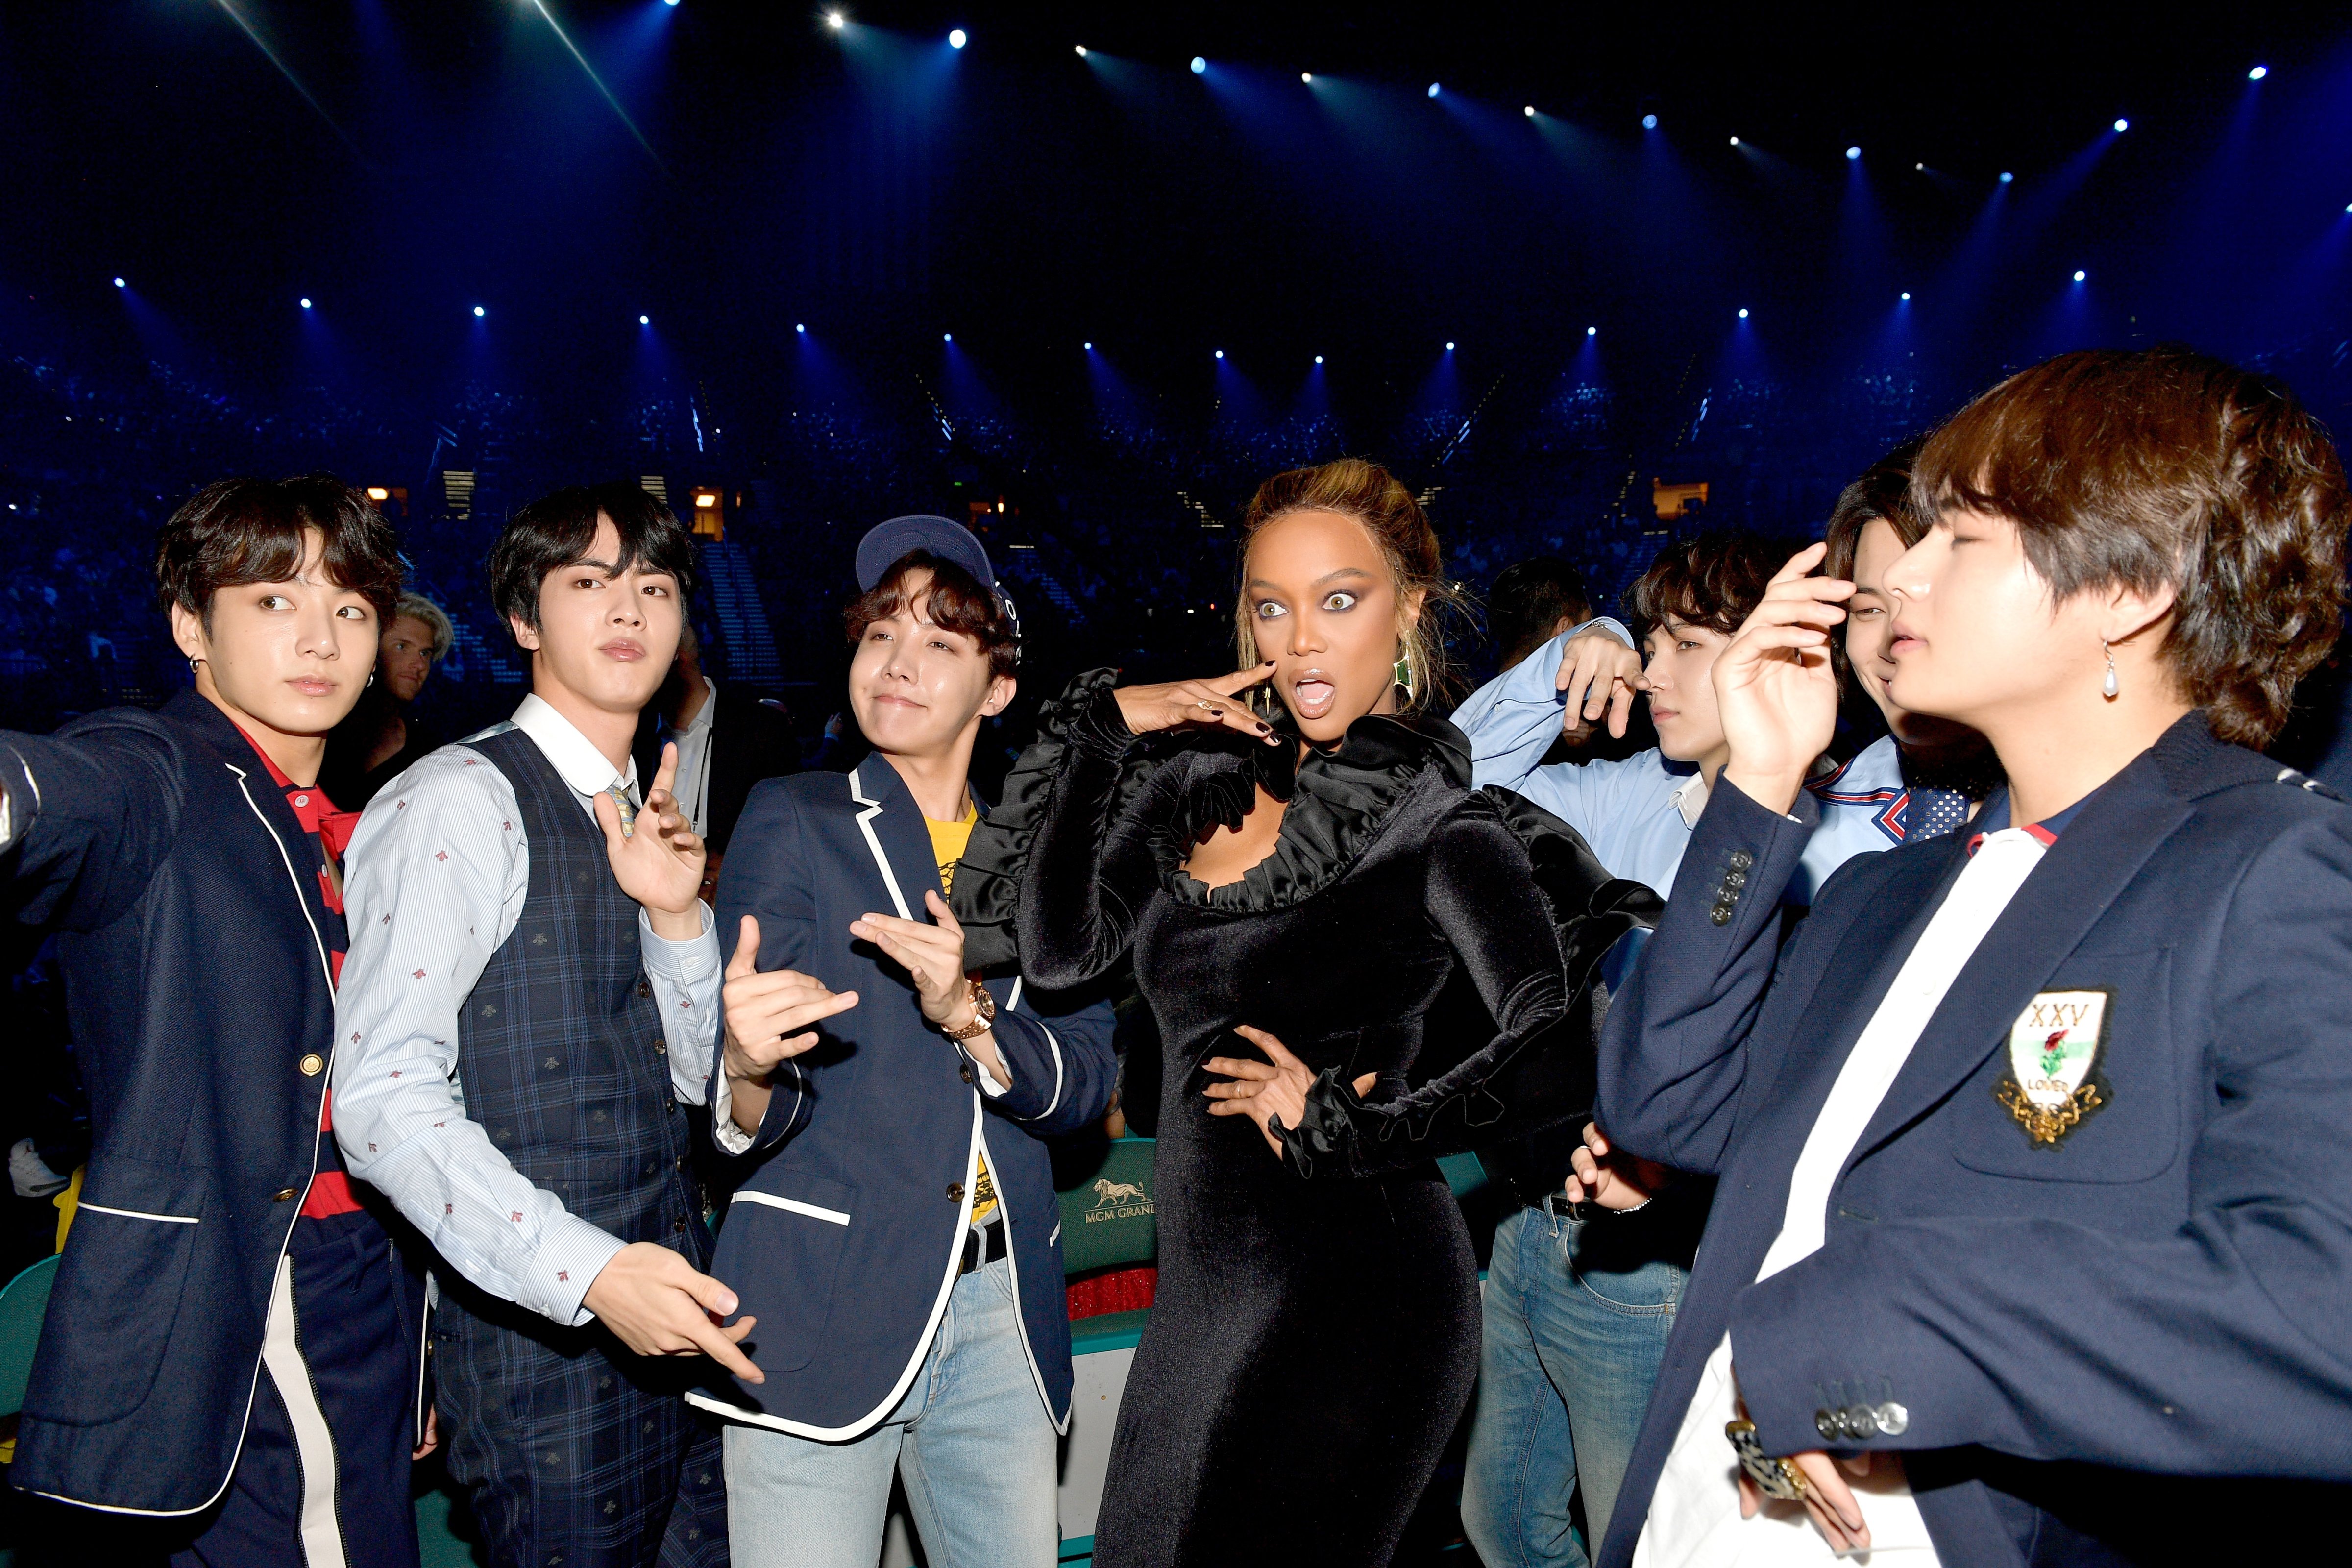 Model Tyra Banks with musical group BTS attend the 2018 Billboard Music Awards at MGM Grand Garden Arena on May 20, 2018 in Las Vegas, Nevada. (Matt Winkelmeyer/BBMA18&mdash;Getty Images for dcp)